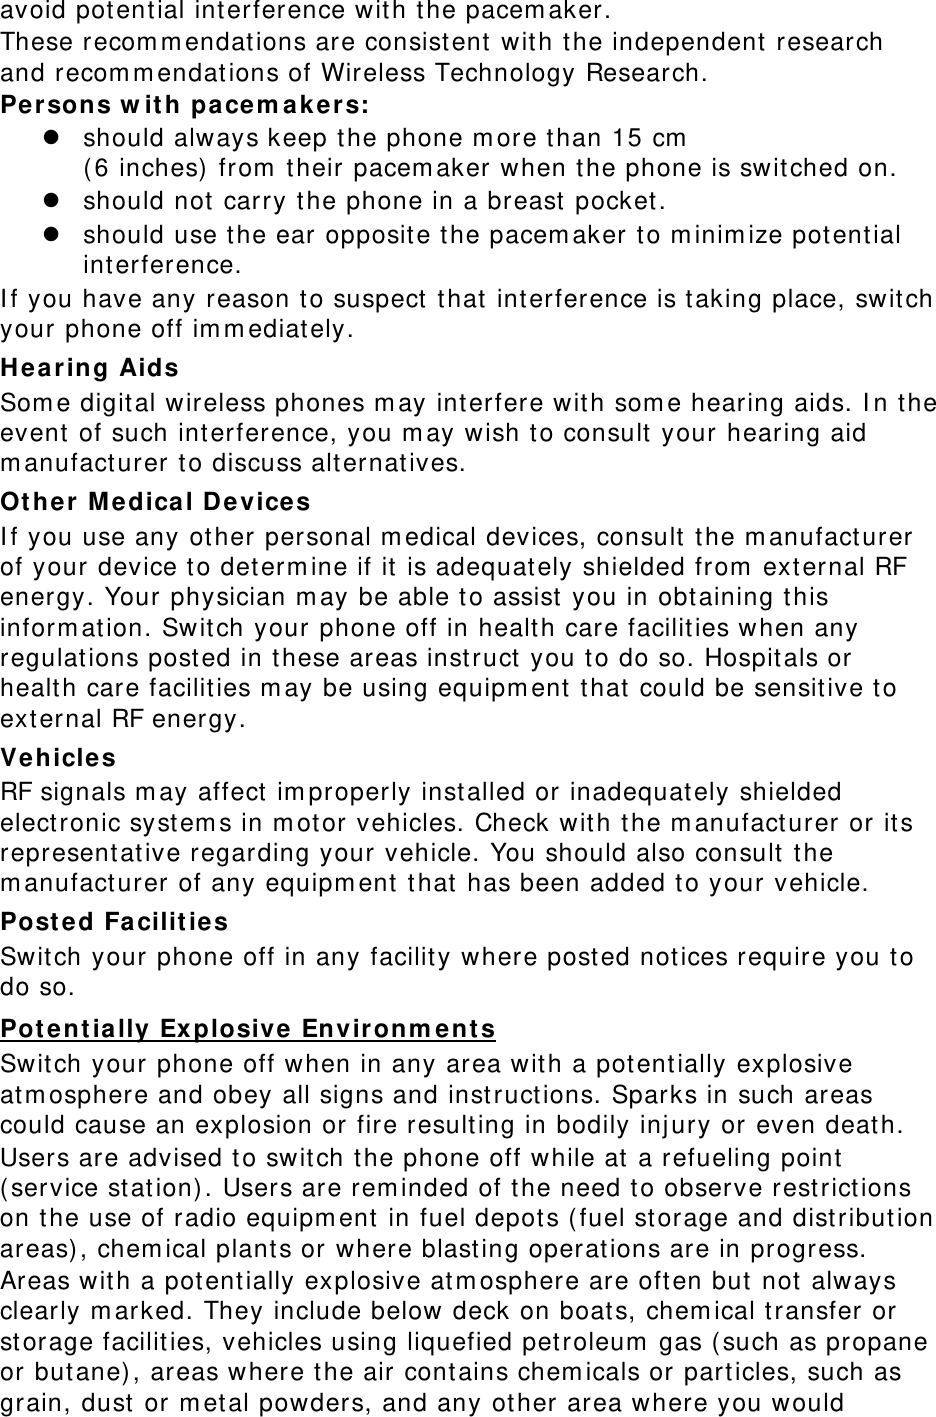 avoid potential interference with the pacemaker. These recommendations are consistent with the independent research and recommendations of Wireless Technology Research. Persons with pacemakers:  should always keep the phone more than 15 cm  (6 inches) from their pacemaker when the phone is switched on.  should not carry the phone in a breast pocket.  should use the ear opposite the pacemaker to minimize potential interference. If you have any reason to suspect that interference is taking place, switch your phone off immediately. Hearing Aids Some digital wireless phones may interfere with some hearing aids. In the event of such interference, you may wish to consult your hearing aid manufacturer to discuss alternatives. Other Medical Devices If you use any other personal medical devices, consult the manufacturer of your device to determine if it is adequately shielded from external RF energy. Your physician may be able to assist you in obtaining this information. Switch your phone off in health care facilities when any regulations posted in these areas instruct you to do so. Hospitals or health care facilities may be using equipment that could be sensitive to external RF energy. Vehicles RF signals may affect improperly installed or inadequately shielded electronic systems in motor vehicles. Check with the manufacturer or its representative regarding your vehicle. You should also consult the manufacturer of any equipment that has been added to your vehicle. Posted Facilities Switch your phone off in any facility where posted notices require you to do so. Switch your phone off when in any area with a potentially explosive atmosphere and obey all signs and instructions. Sparks in such areas could cause an explosion or fire resulting in bodily injury or even death. Potentially Explosive Environments Users are advised to switch the phone off while at a refueling point (service station). Users are reminded of the need to observe restrictions on the use of radio equipment in fuel depots (fuel storage and distribution areas), chemical plants or where blasting operations are in progress. Areas with a potentially explosive atmosphere are often but not always clearly marked. They include below deck on boats, chemical transfer or storage facilities, vehicles using liquefied petroleum gas (such as propane or butane), areas where the air contains chemicals or particles, such as grain, dust or metal powders, and any other area where you would 